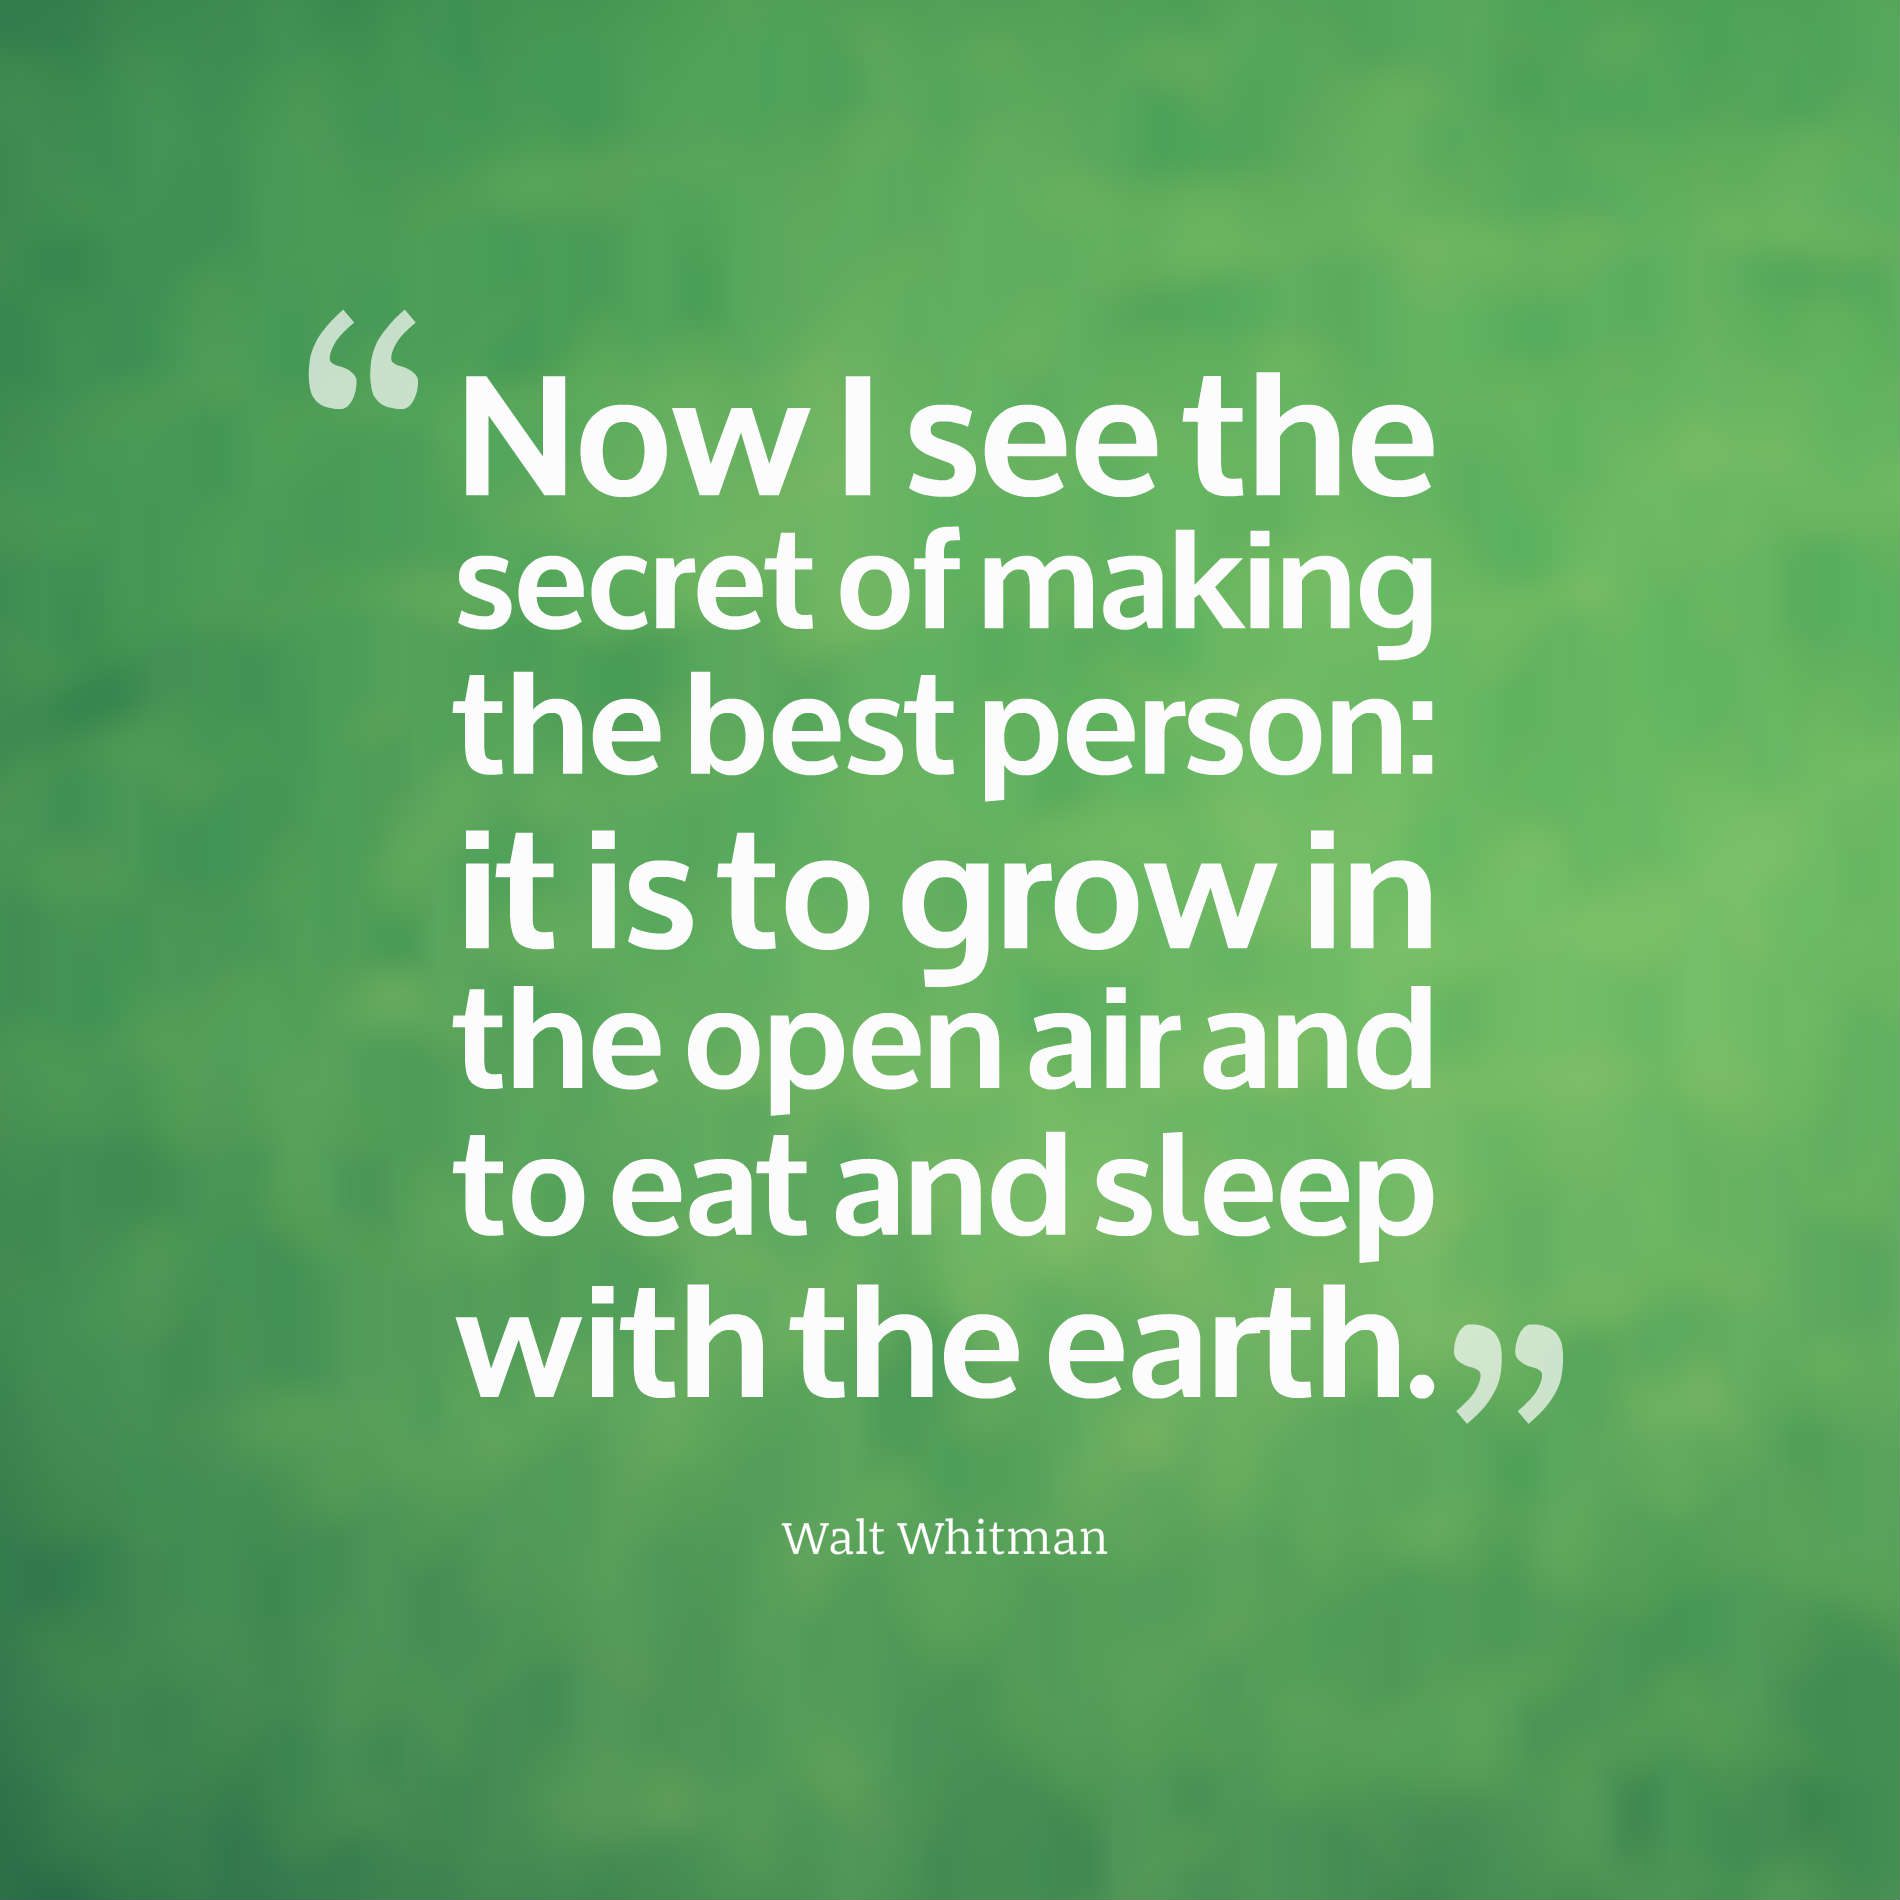 Now I see the secret of making the best person it is to grow in the open air and to eat and sleep with the earth.